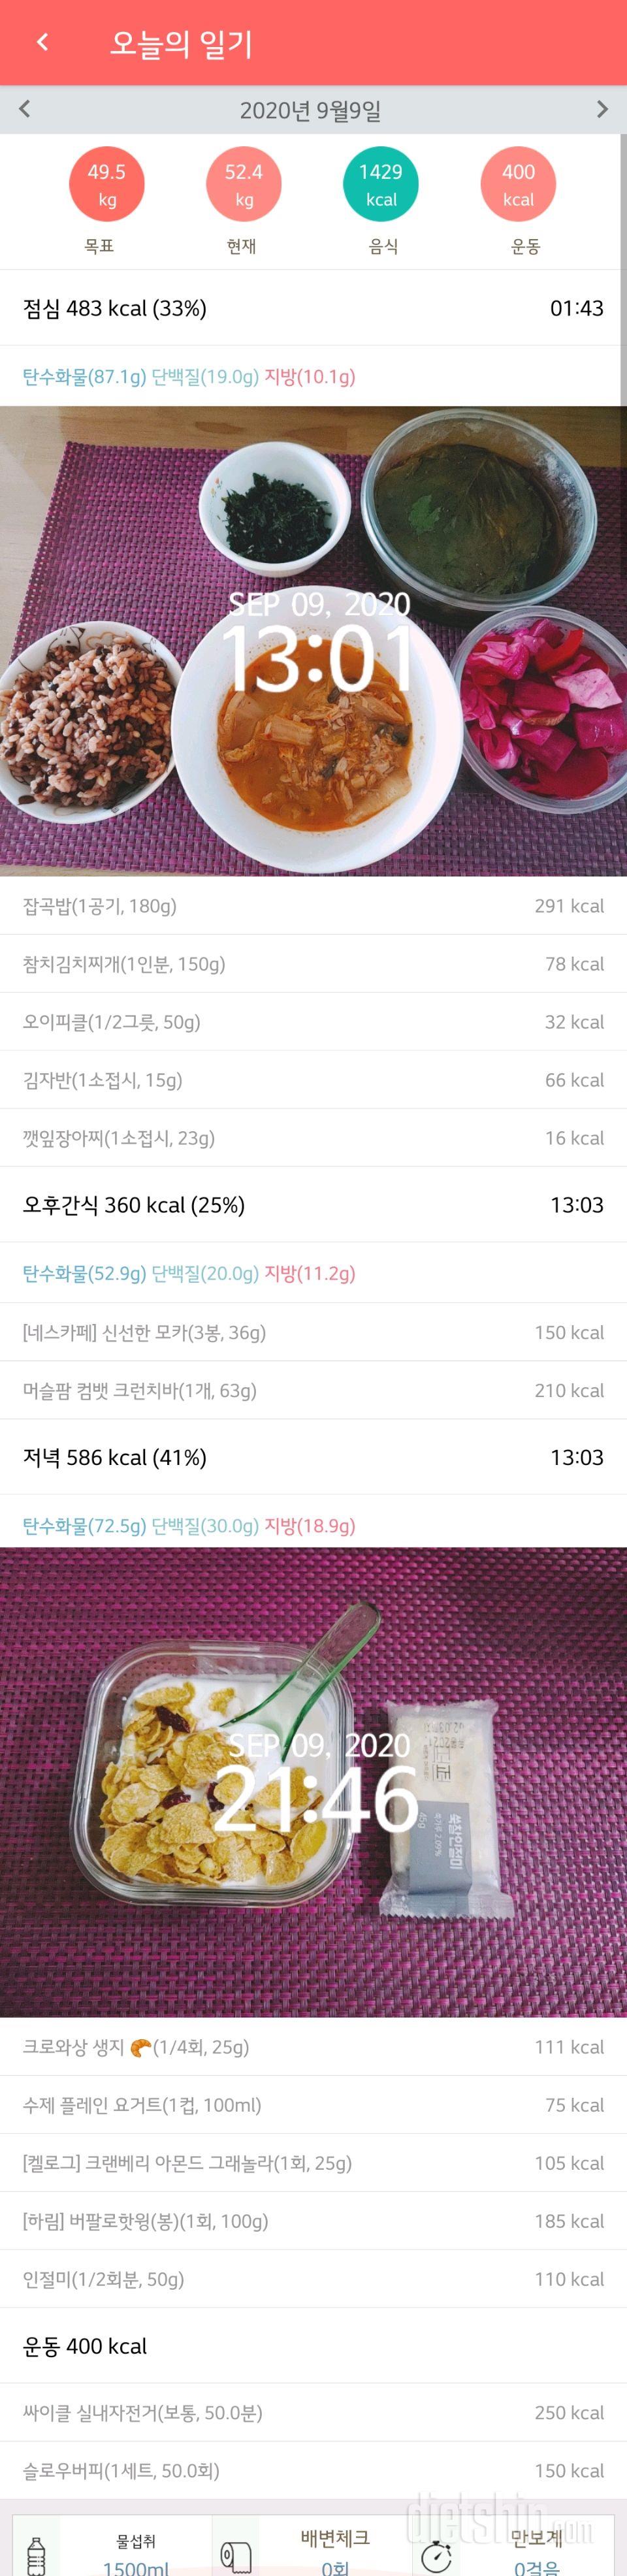 9월 9일 수욜